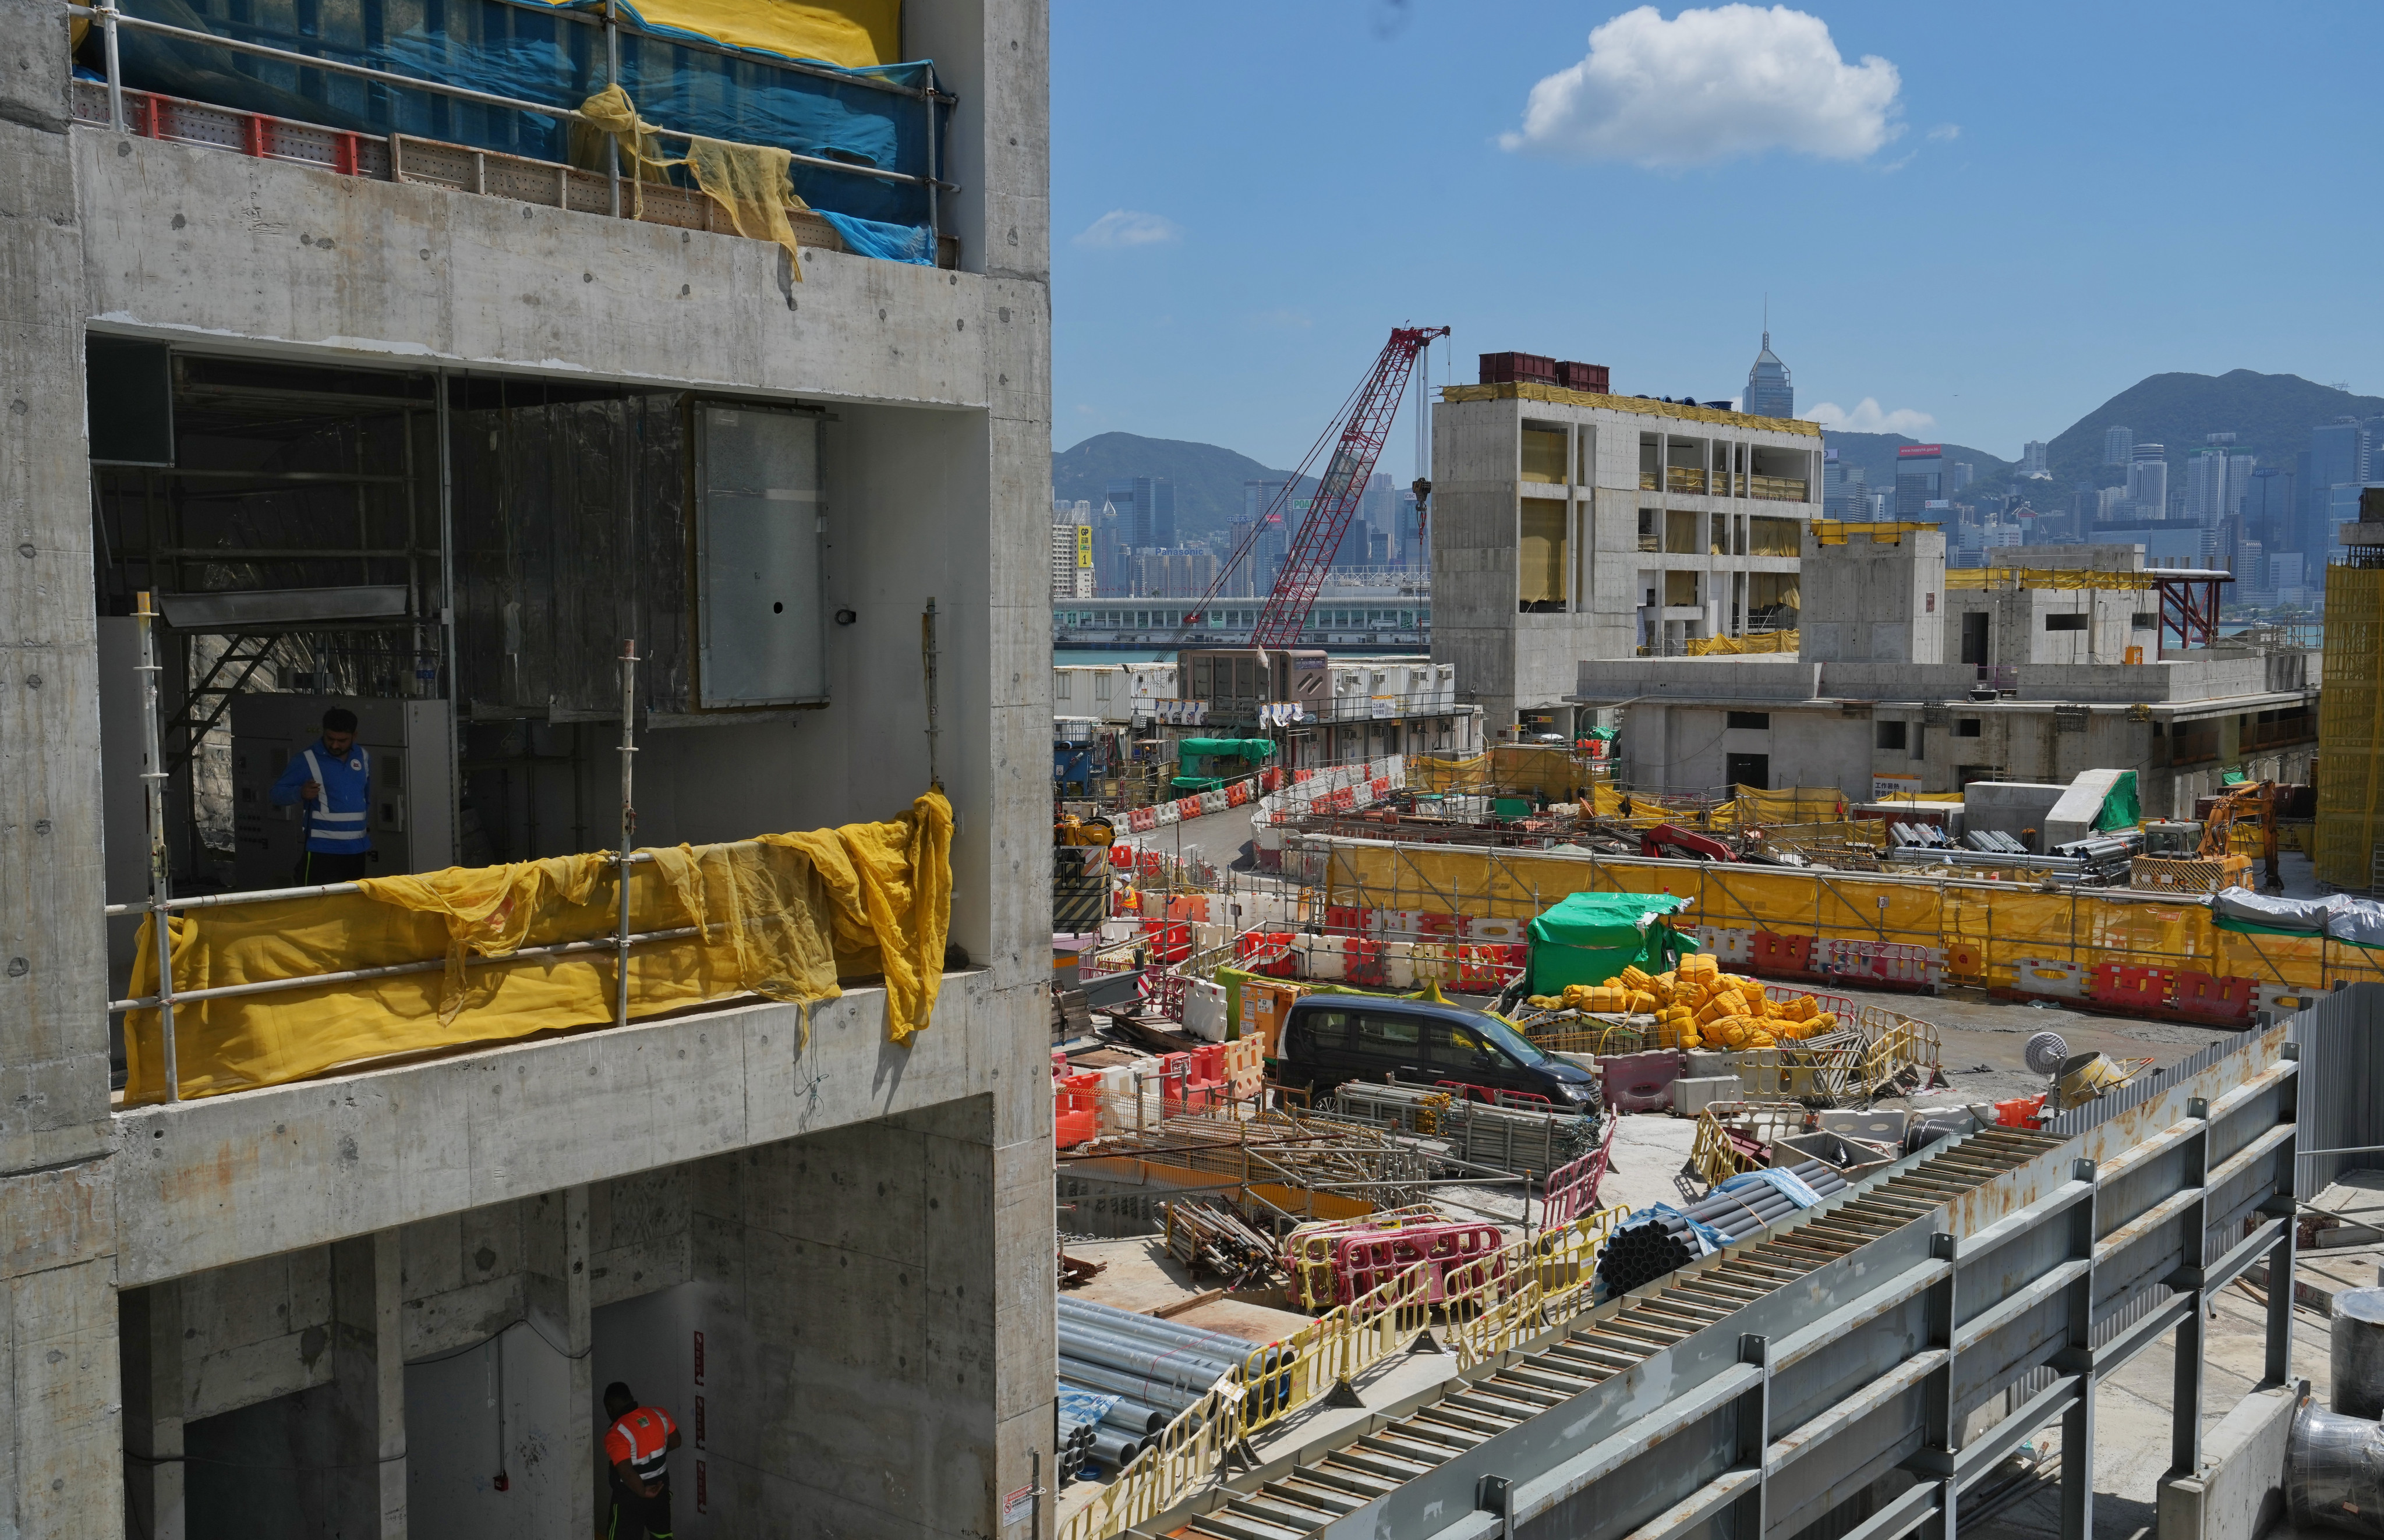 Construction workers work in the site of Hong Kong’s West Kowloon art hub. Photo: Elson LI